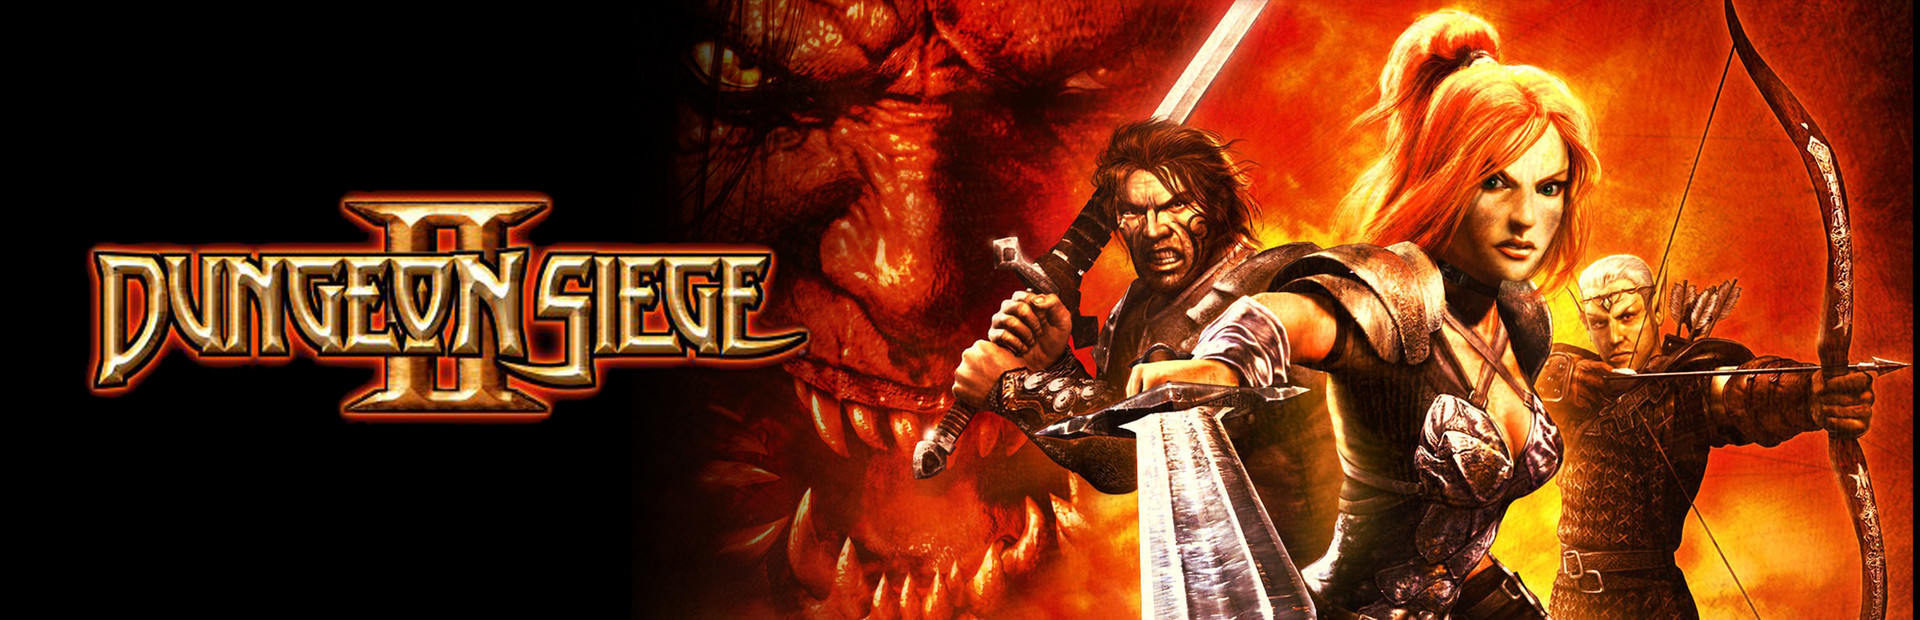 Dungeon Siege II cover image